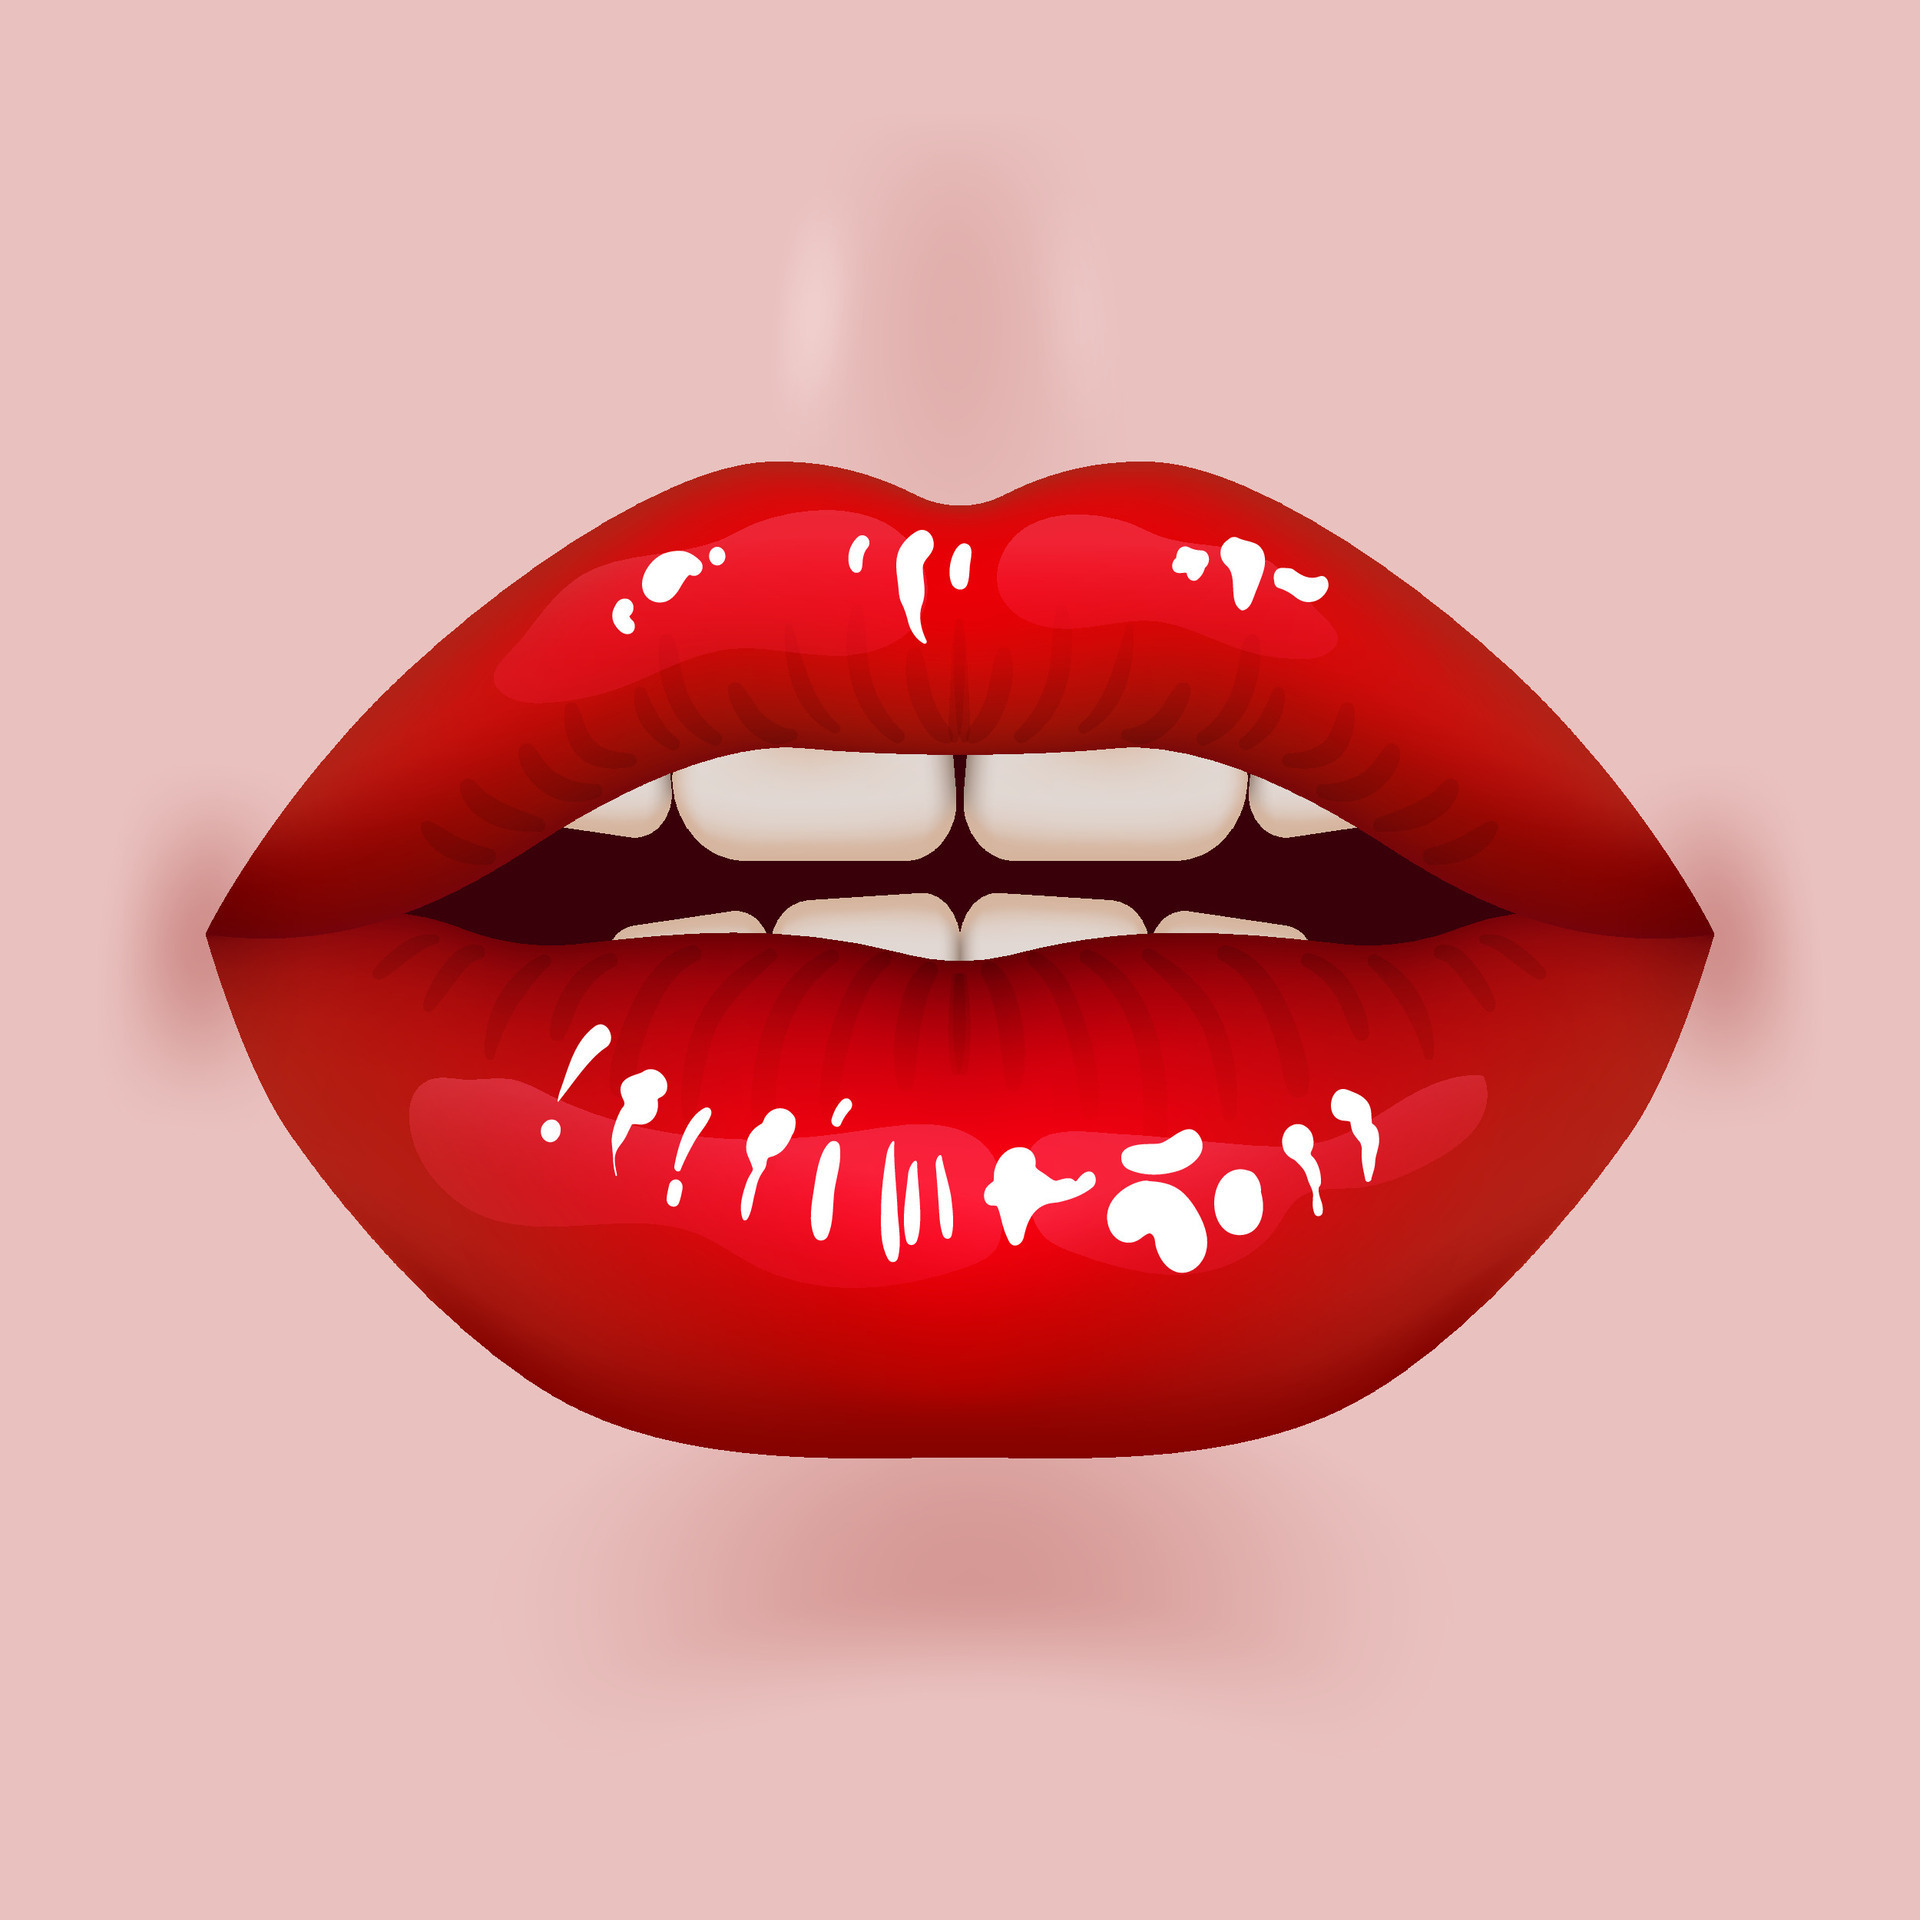 Sexy Woman Red Lips Face Black White Sketch Design 